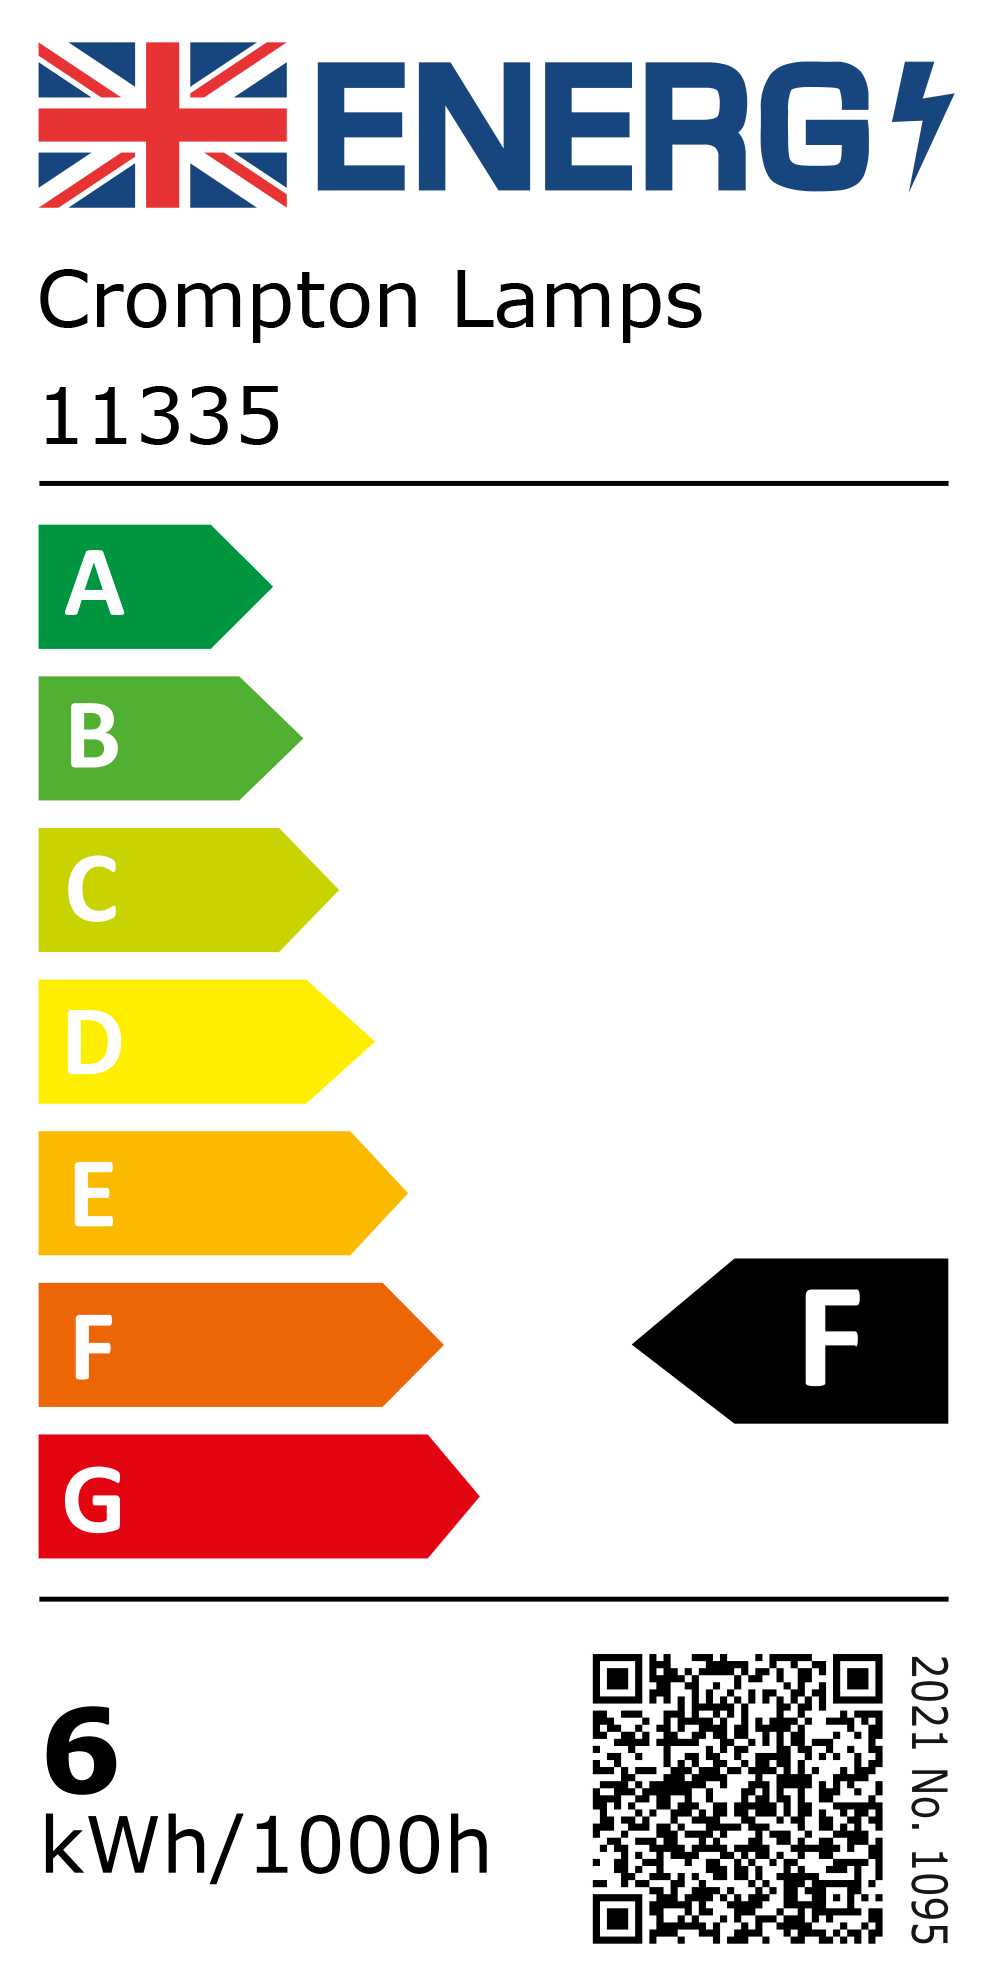 New 2021 Energy Rating Label: Stock Code 11335